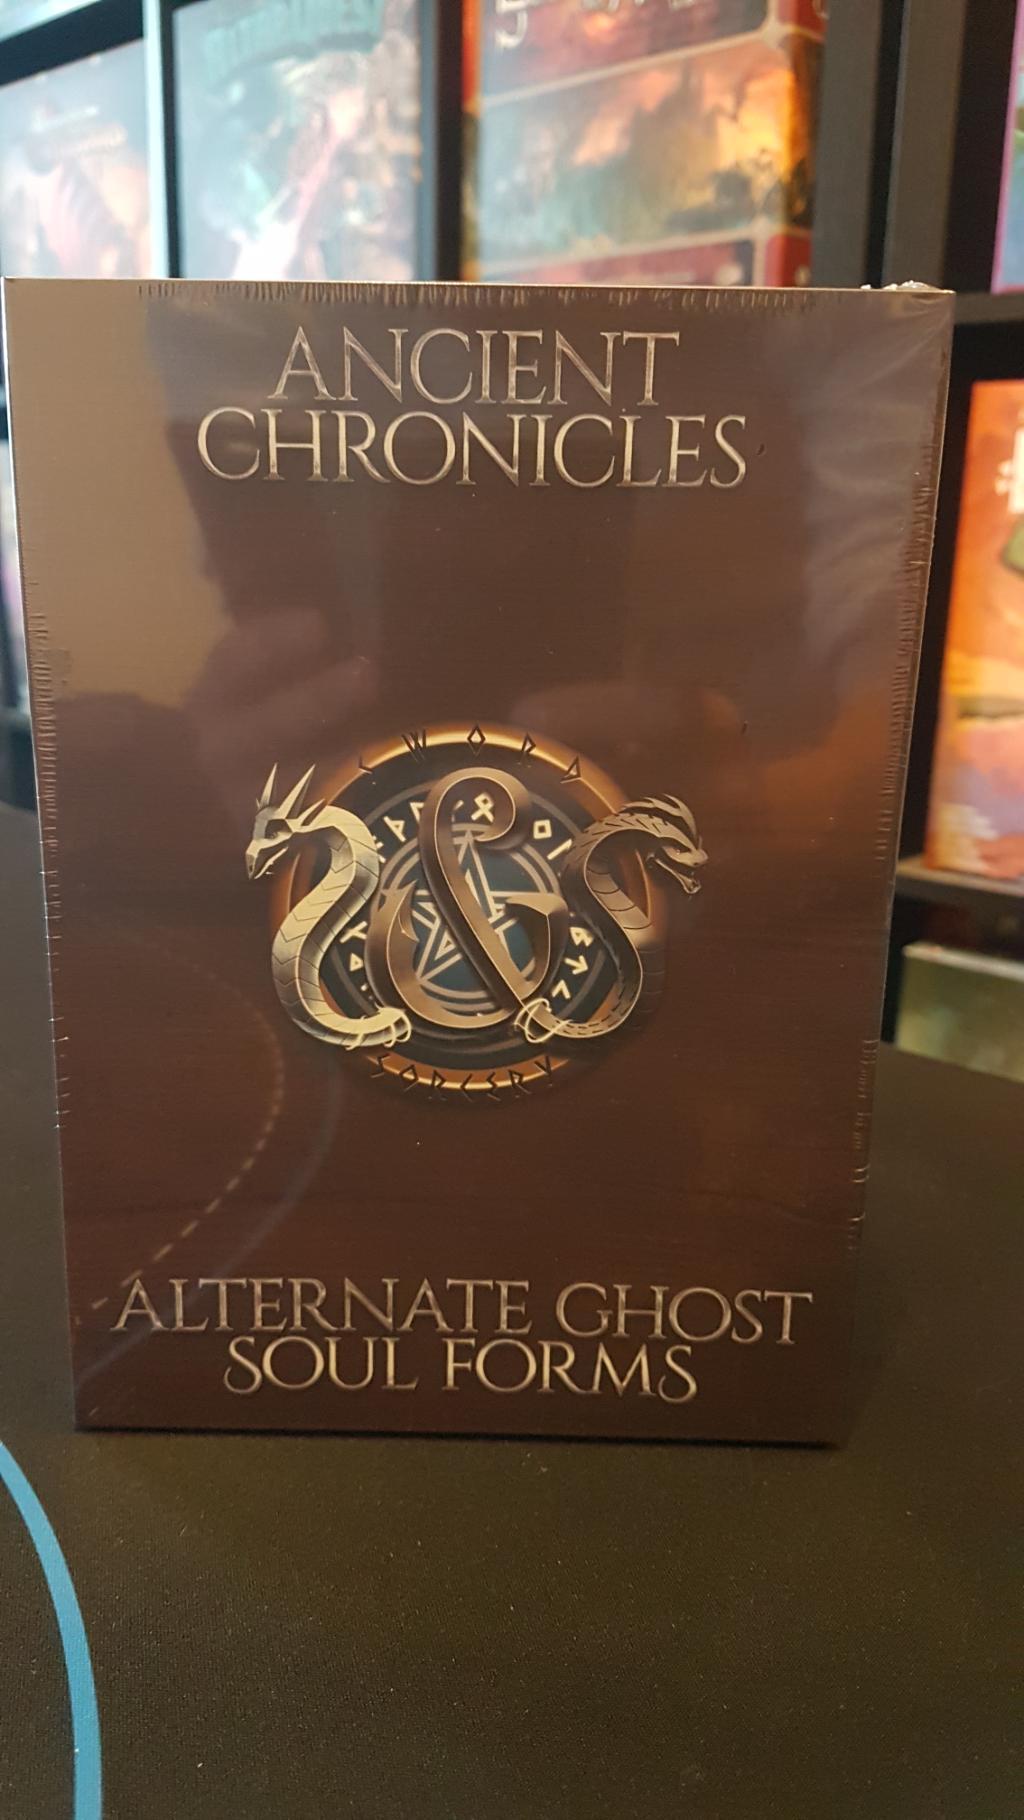 Sword & Sorcery - Ancient Chronicles - Alternate Ghost Soul Forms